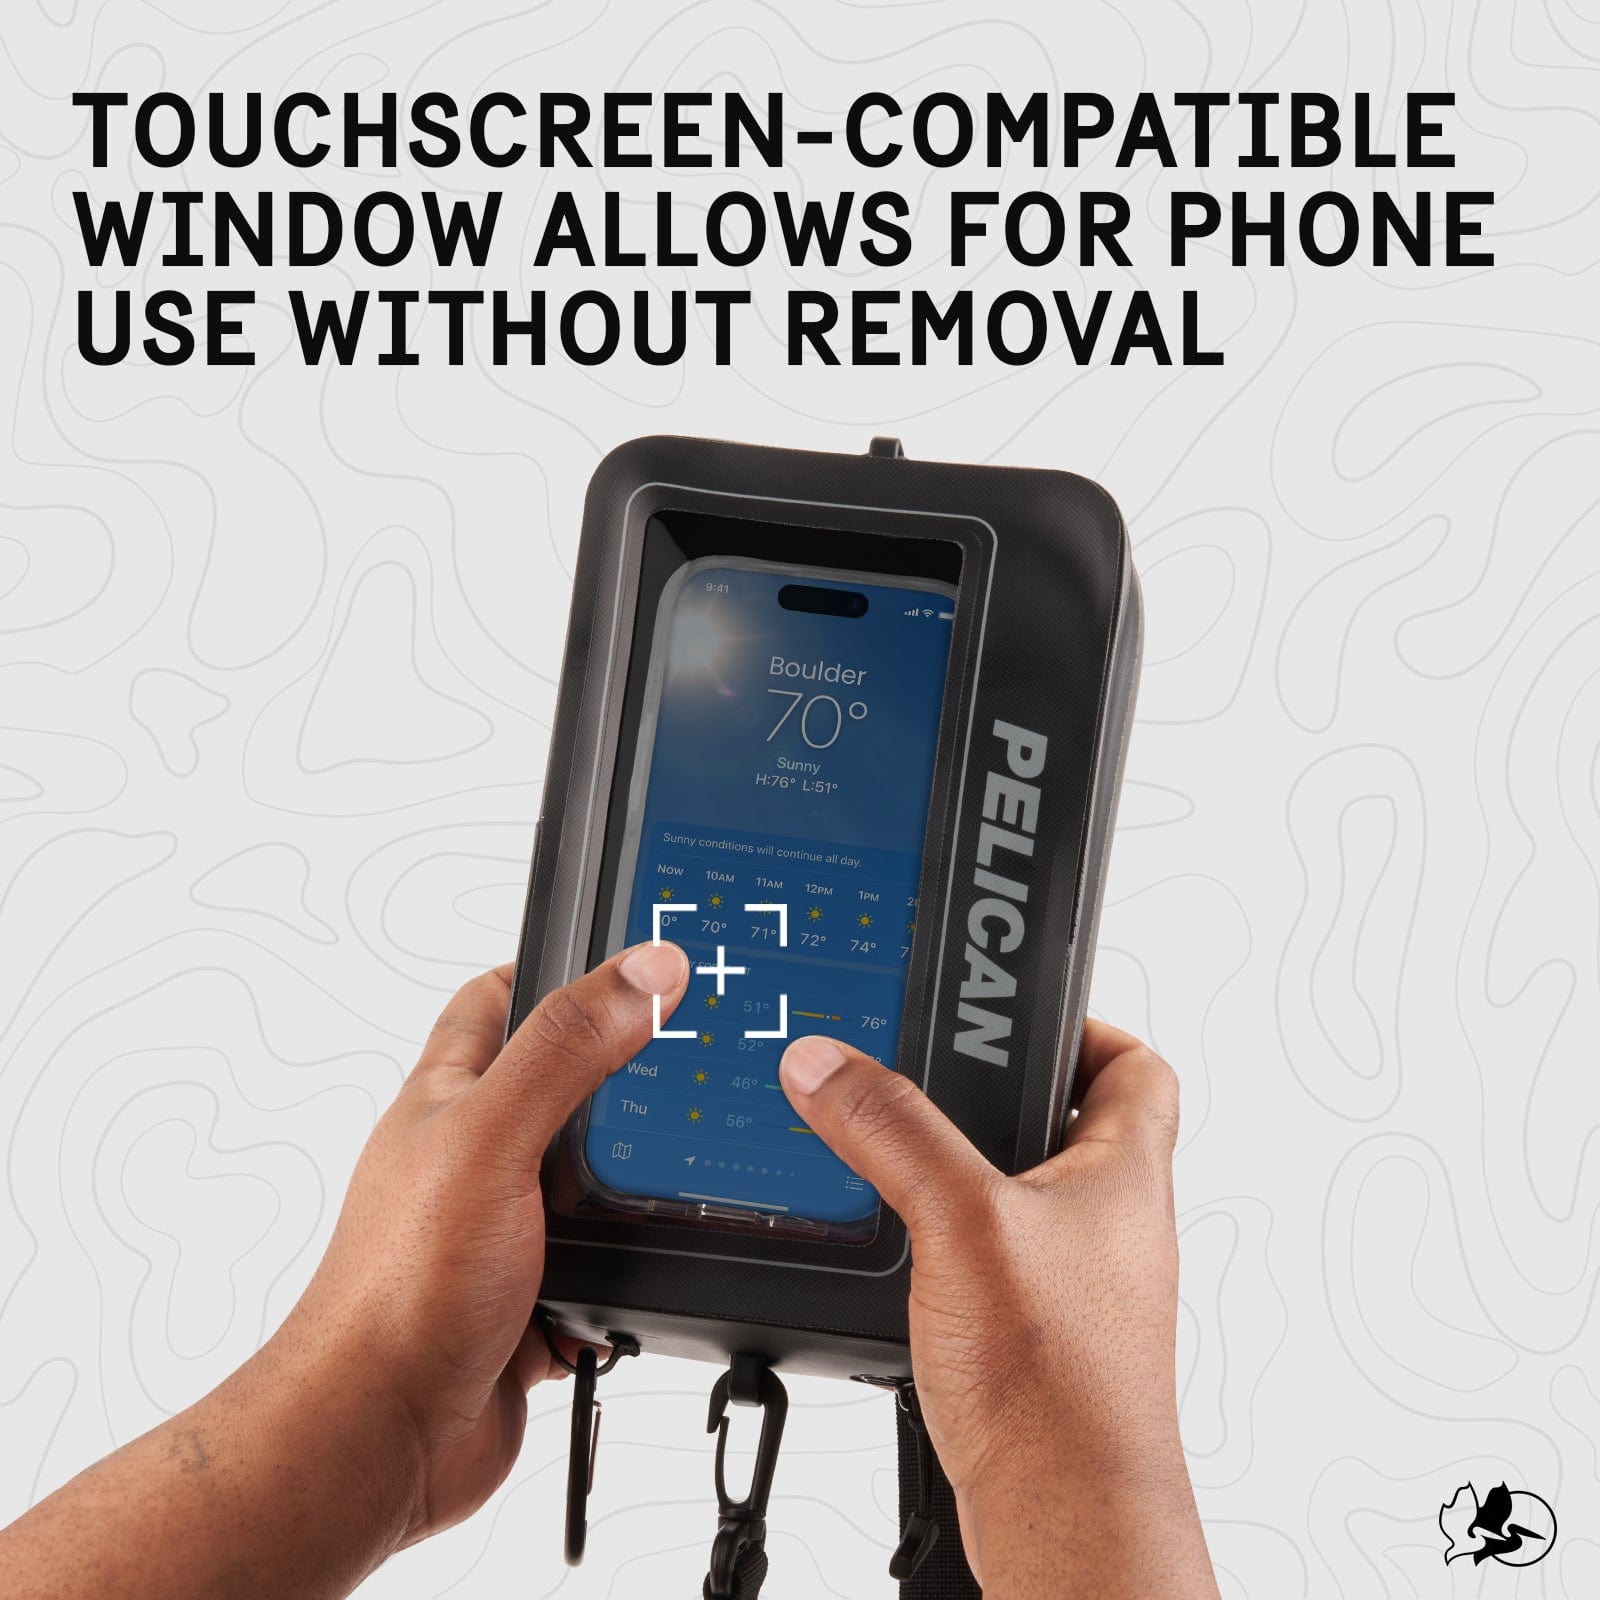 TOUCHSCREEN COMPATIBLE WINDOW ALLOWS FOR PHONE USE WITHOUT REMOVAL